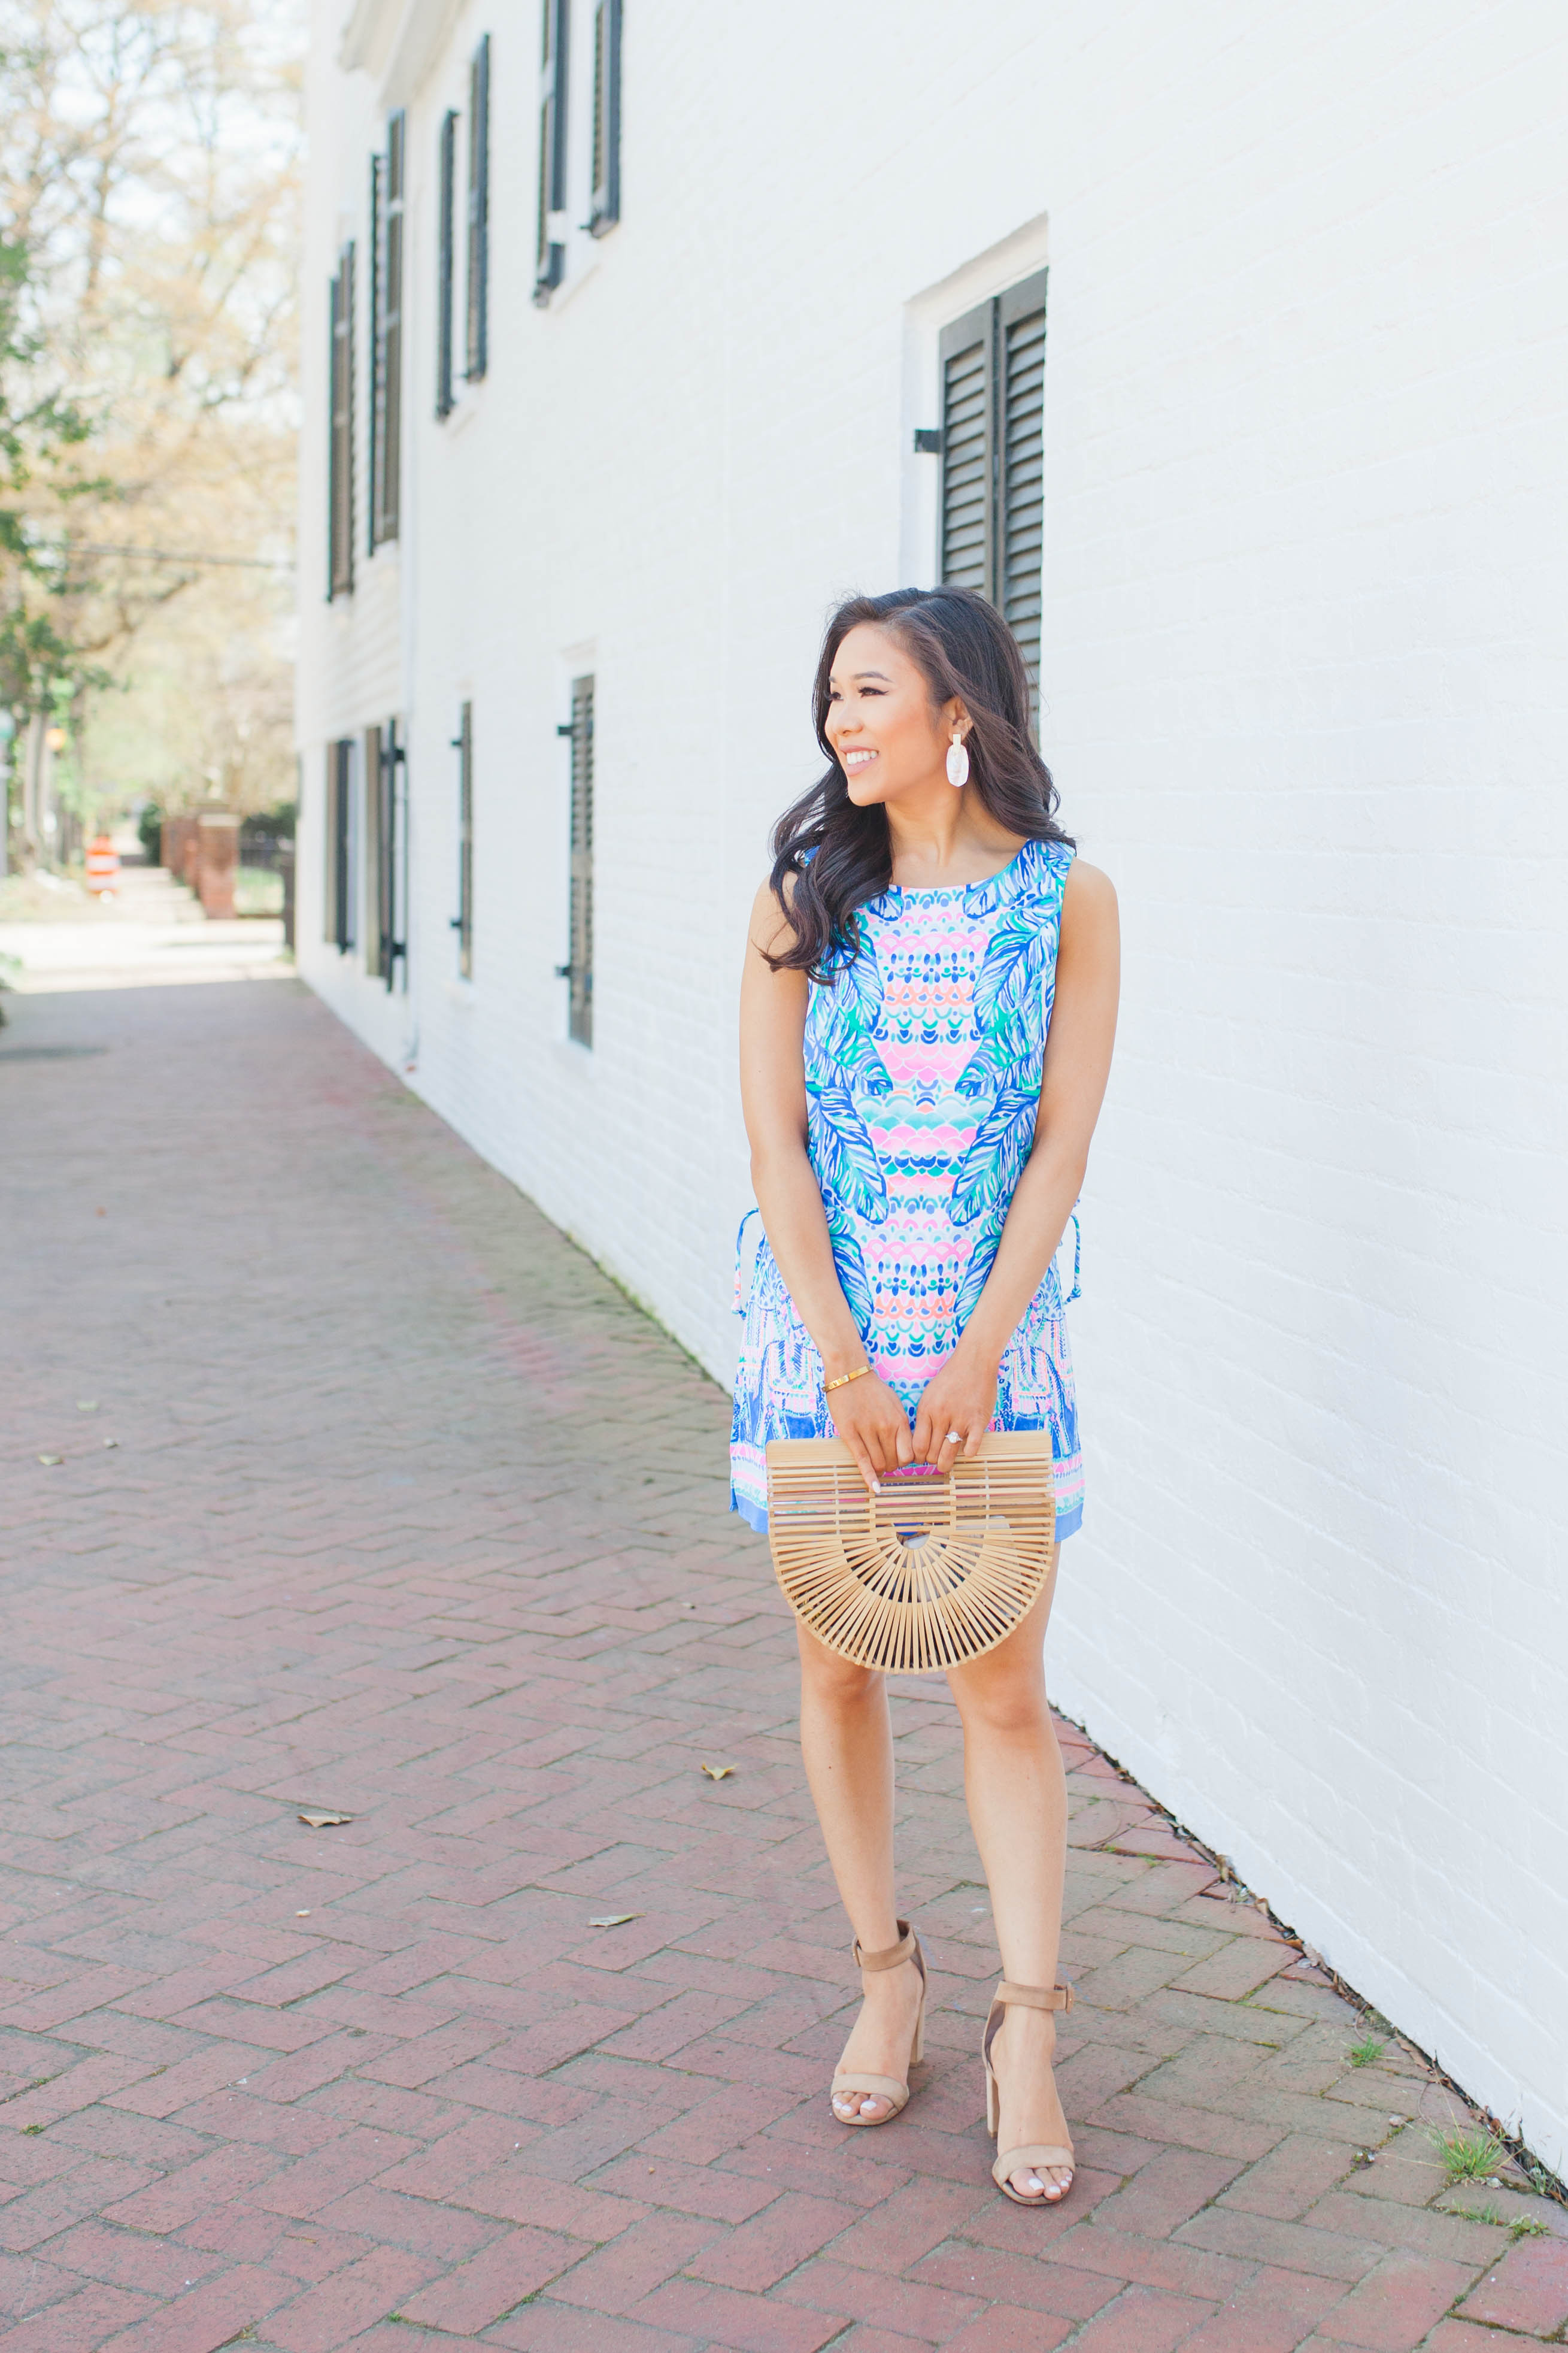 Lilly Pulitzer Donna Romper with Cult Gaia bamboo bag and Kendra Scott earrings on blogger Hoang-Kim